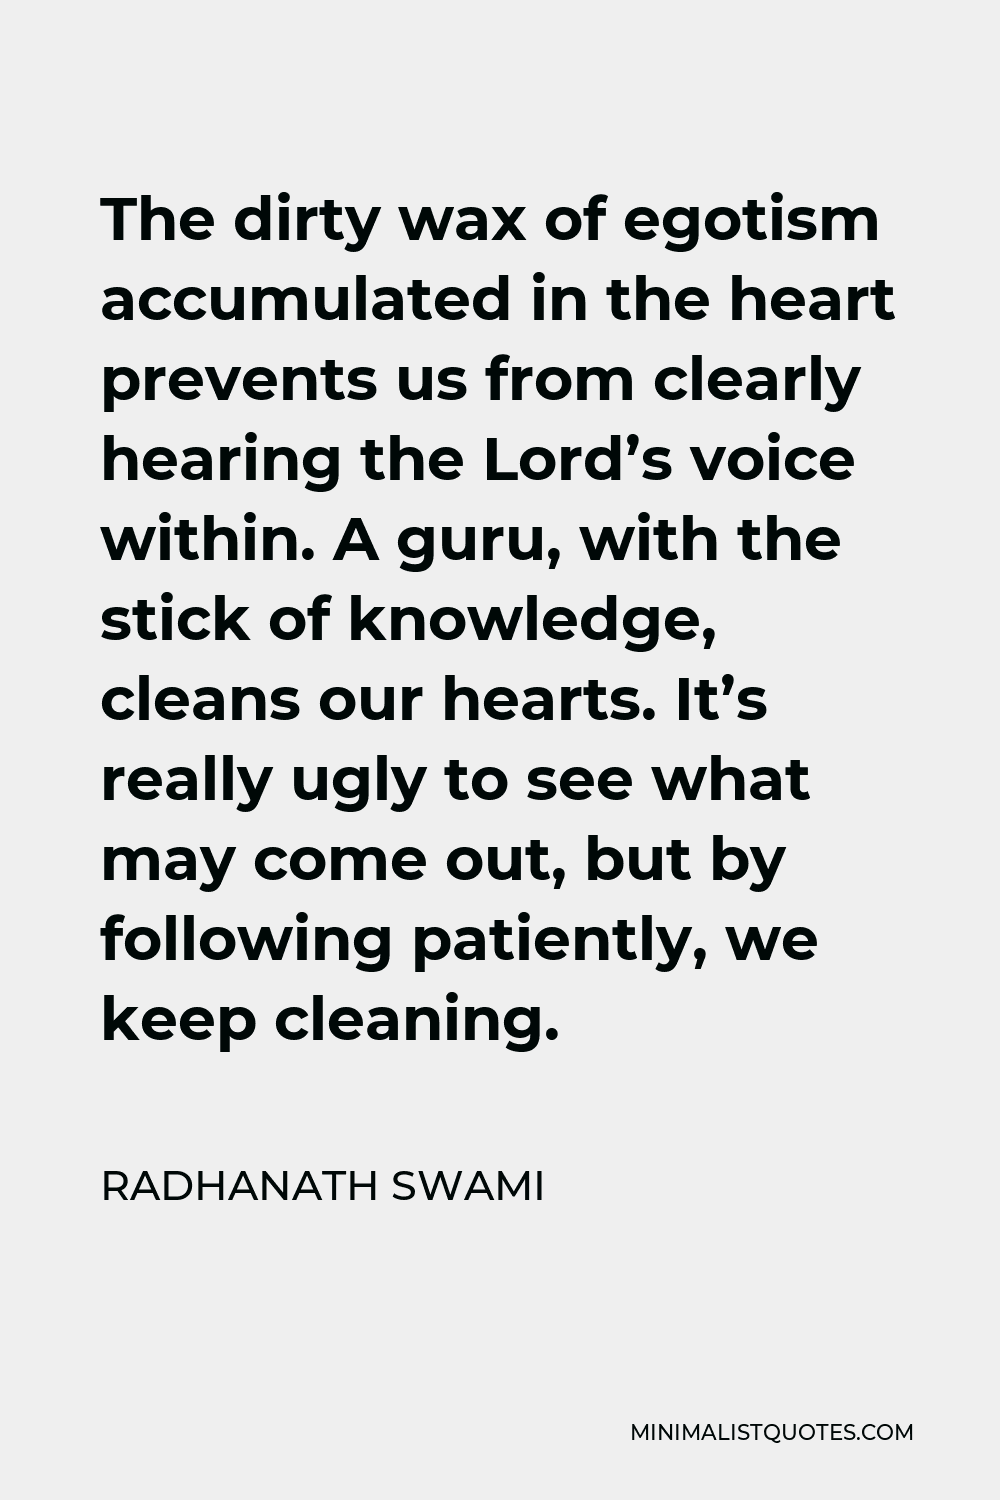 Radhanath Swami Quote - The dirty wax of egotism accumulated in the heart prevents us from clearly hearing the Lord’s voice within. A guru, with the stick of knowledge, cleans our hearts. It’s really ugly to see what may come out, but by following patiently, we keep cleaning.